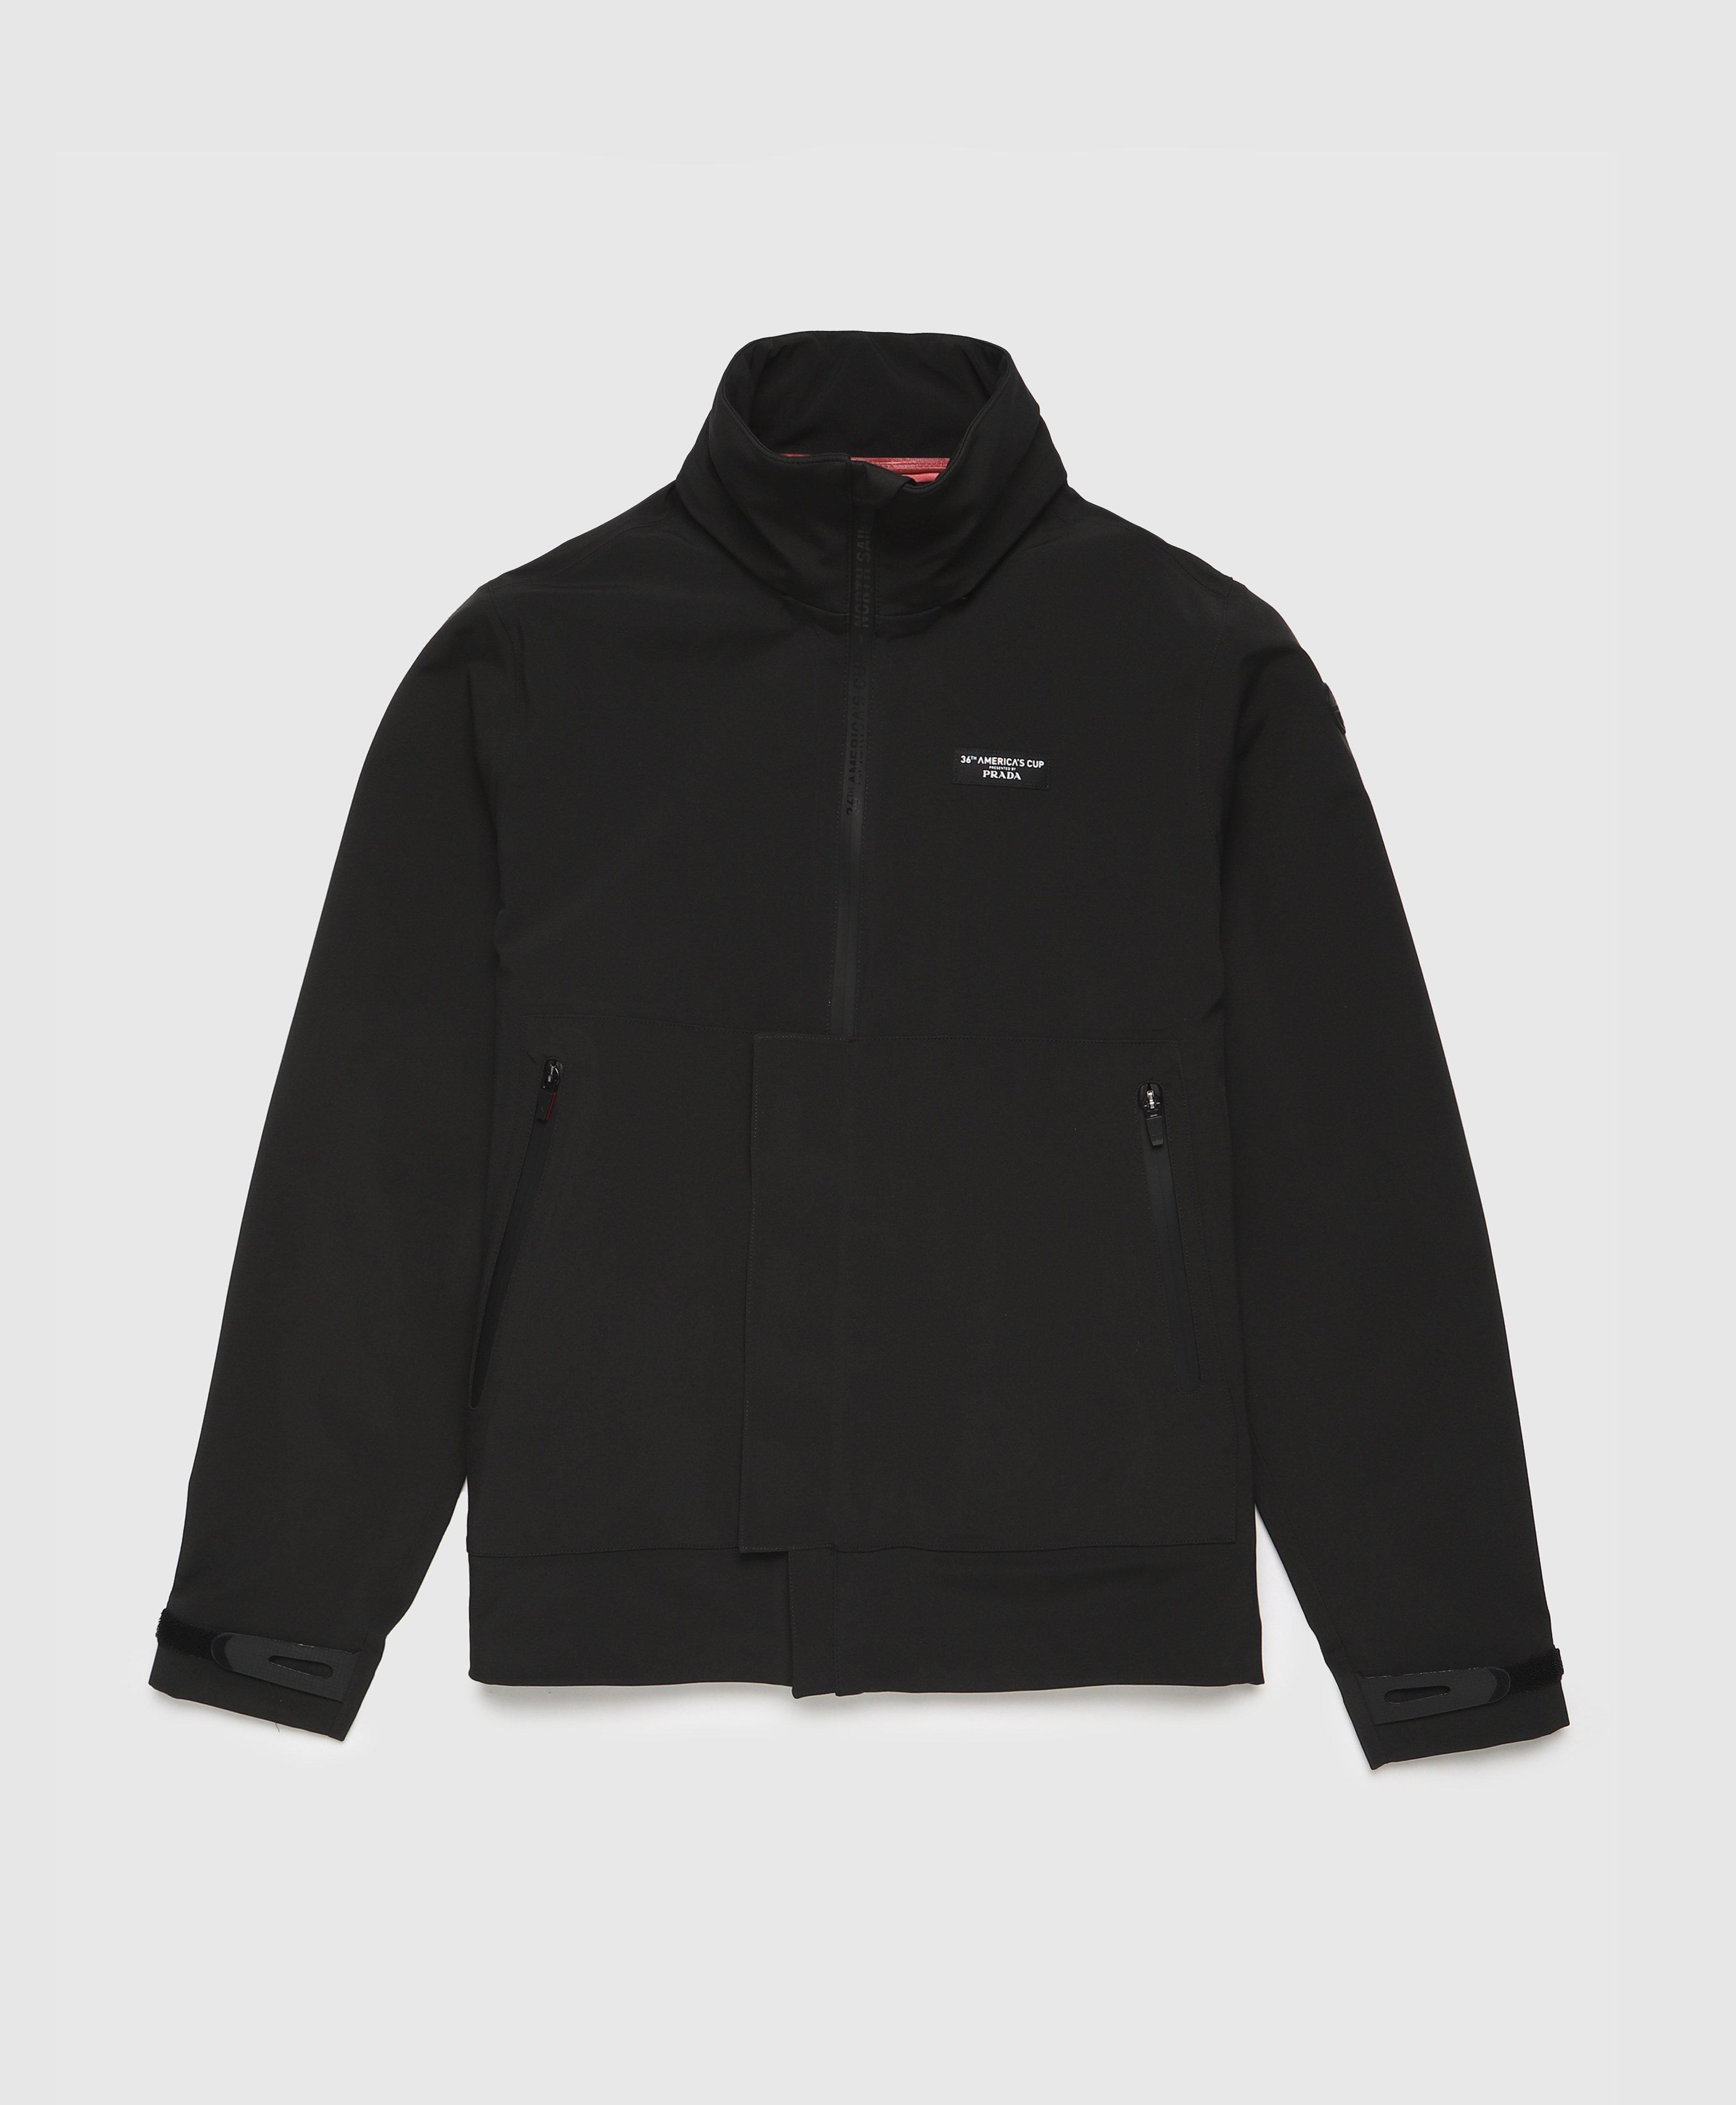 North Sails Nc36 By Prada Tabbed Softshell Jacket in Black for Men 